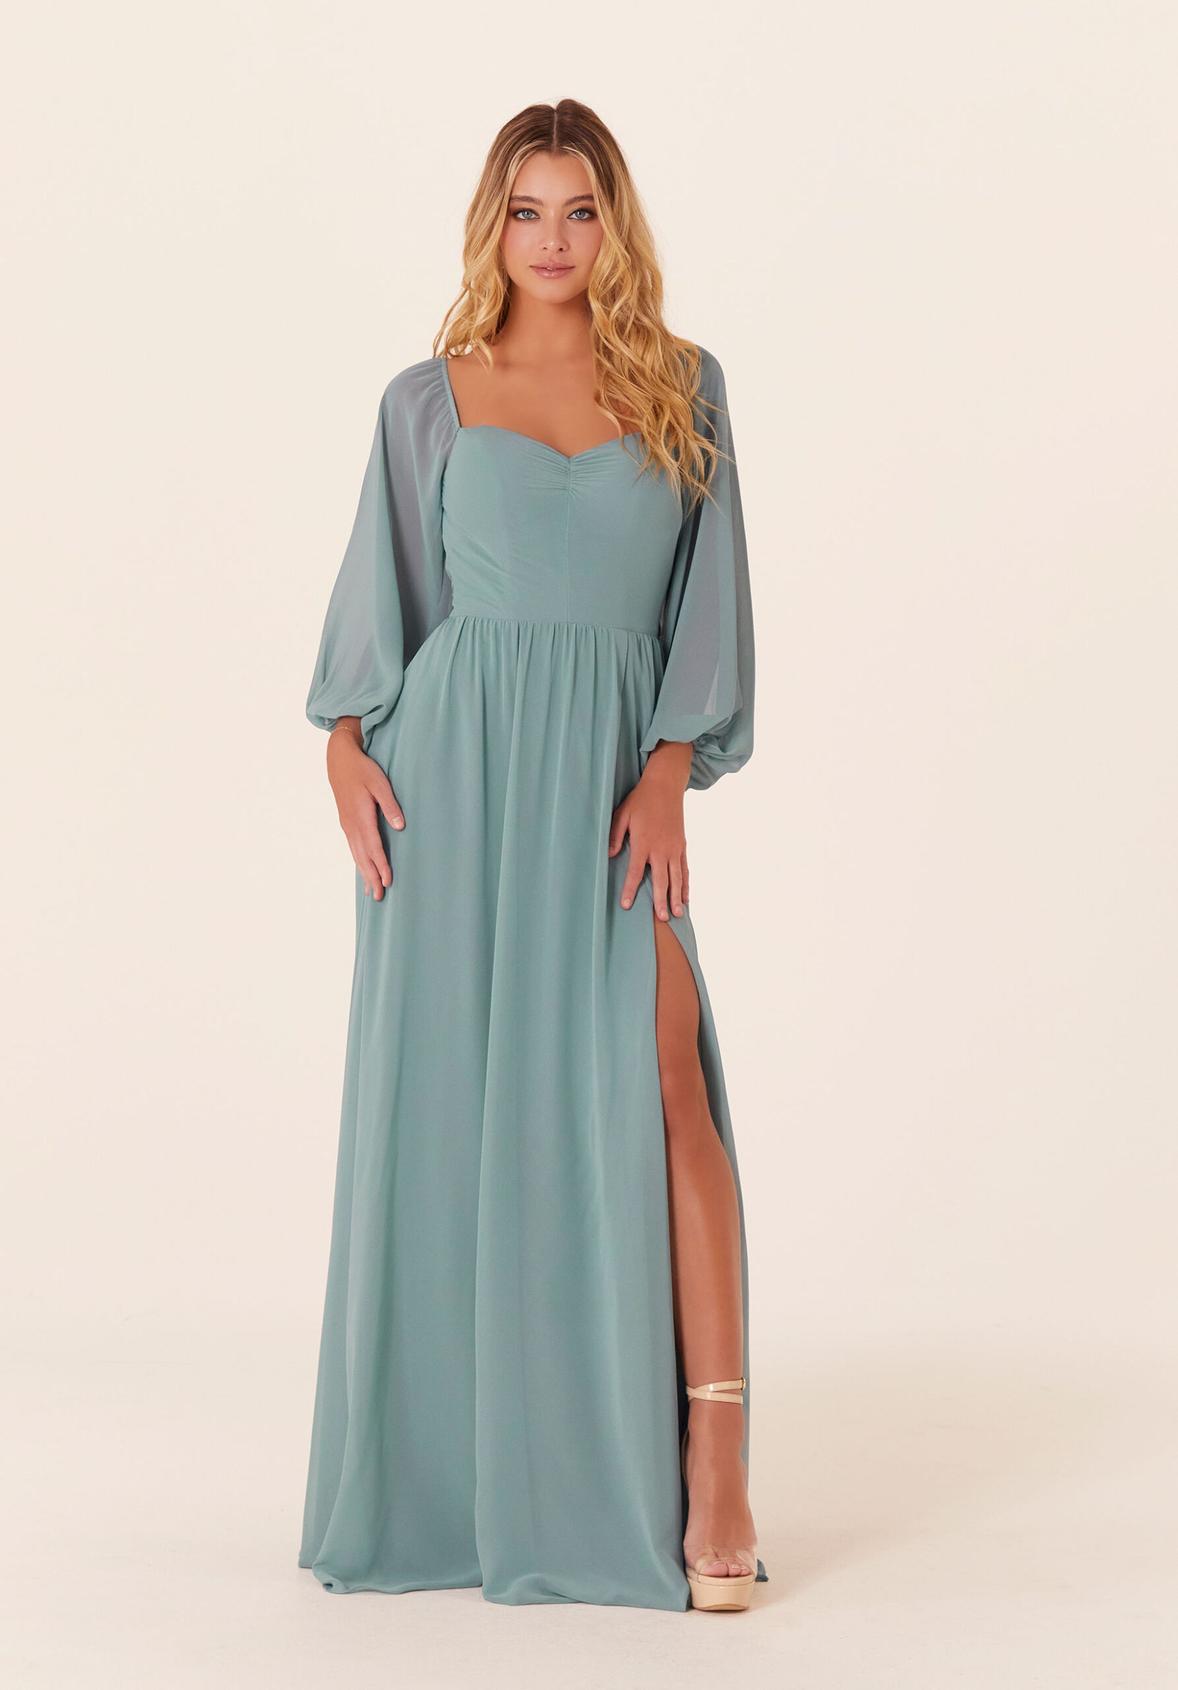 Chiffon Bridesmaid Dress with Bishop Sleeves offers in Morilee